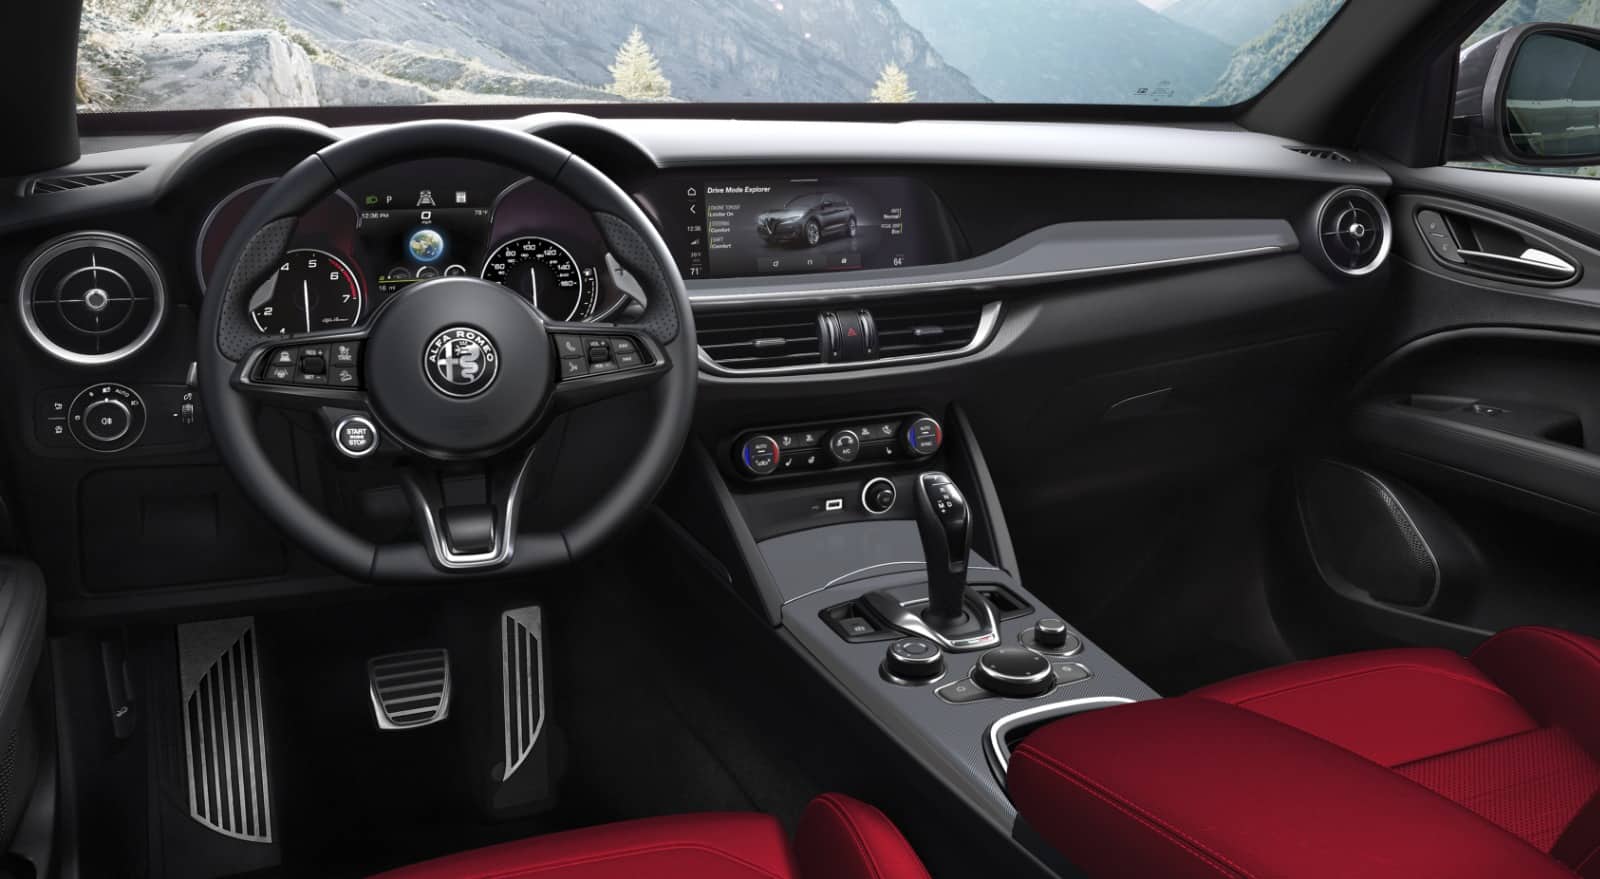 A 360-degree view of the interior of the 2023 Alfa Romeo Stelvio, beginning with the steering wheet, center stack controls and dash.